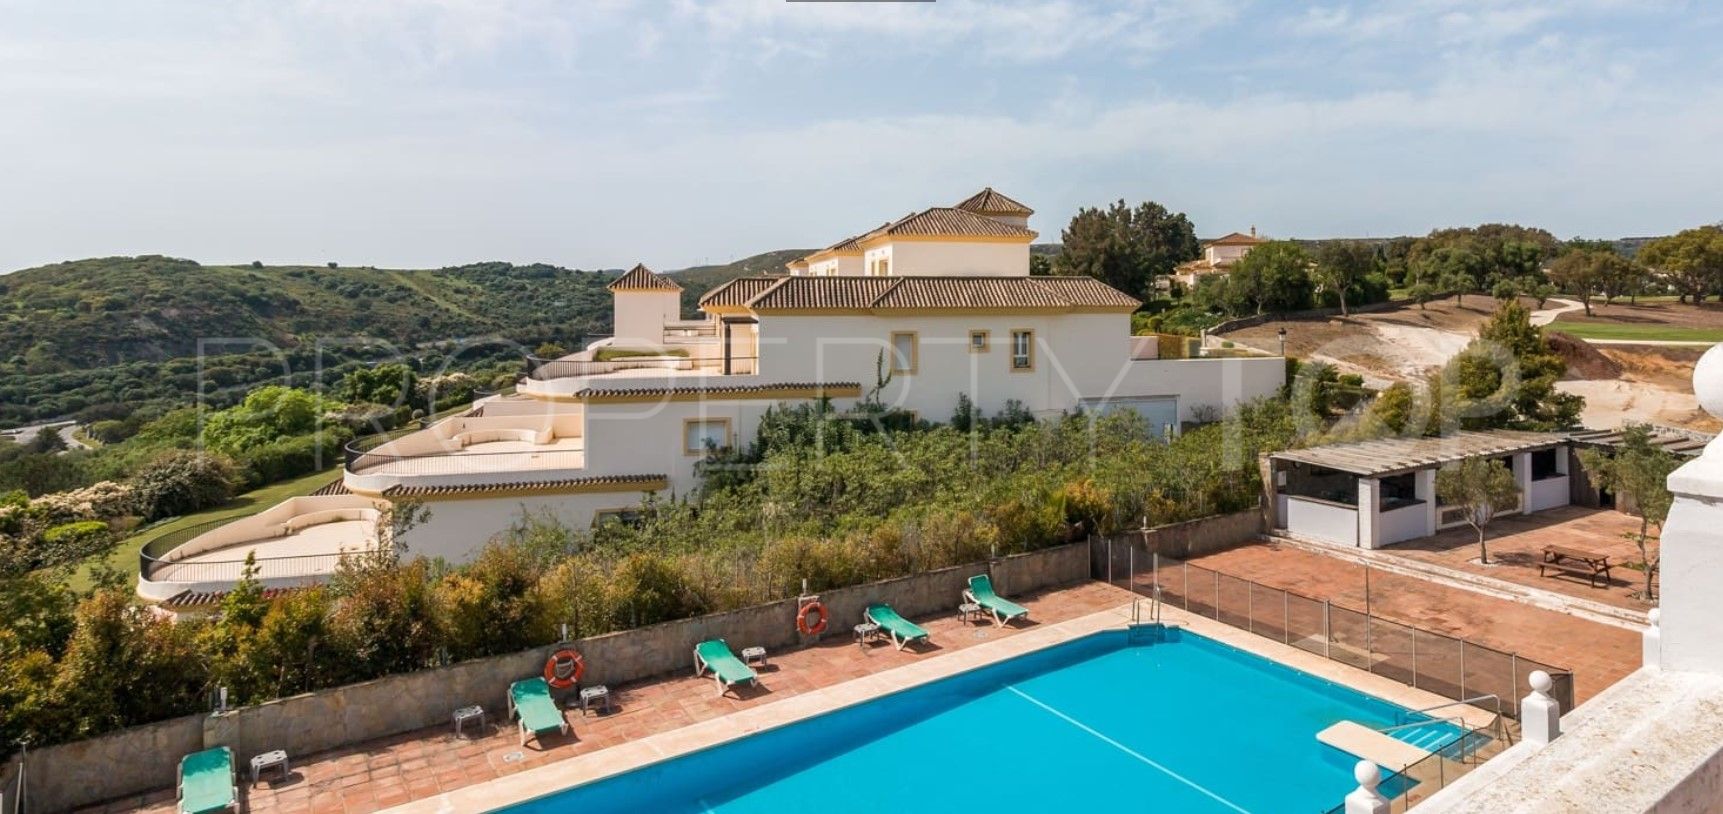 For sale San Roque hotel with 84 bedrooms